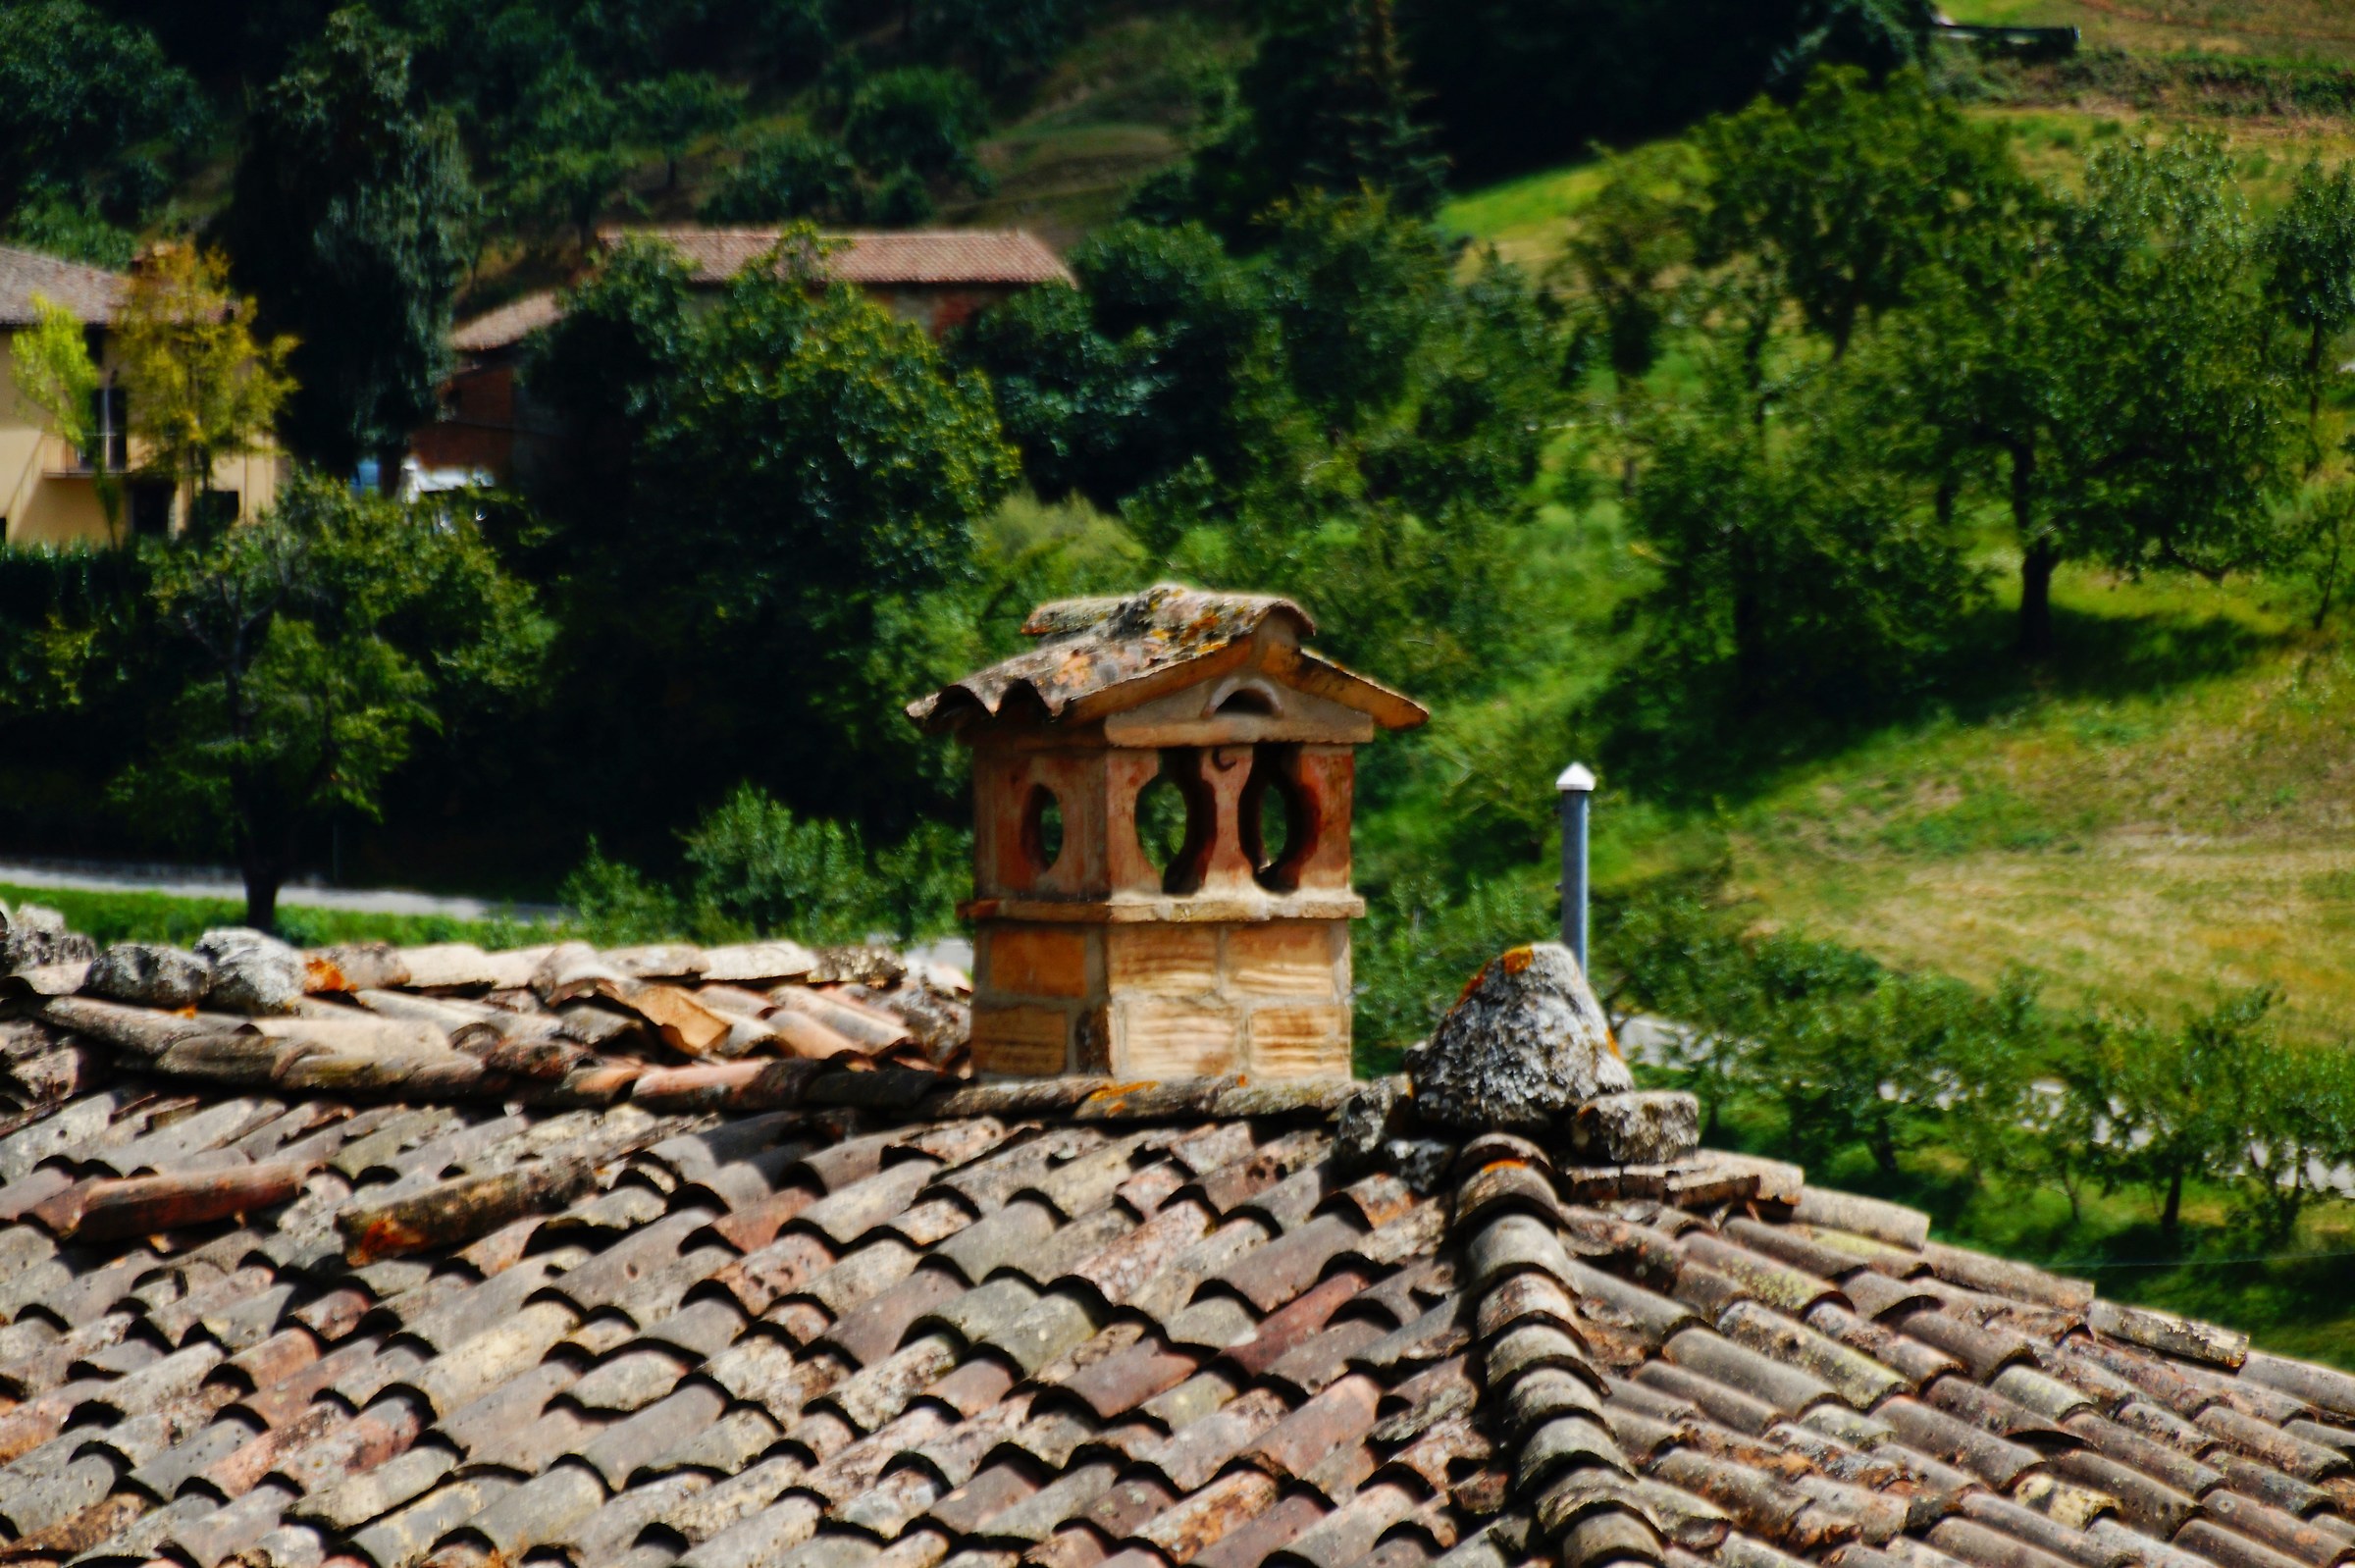 The roofs of Montecorone (Mo) 3...